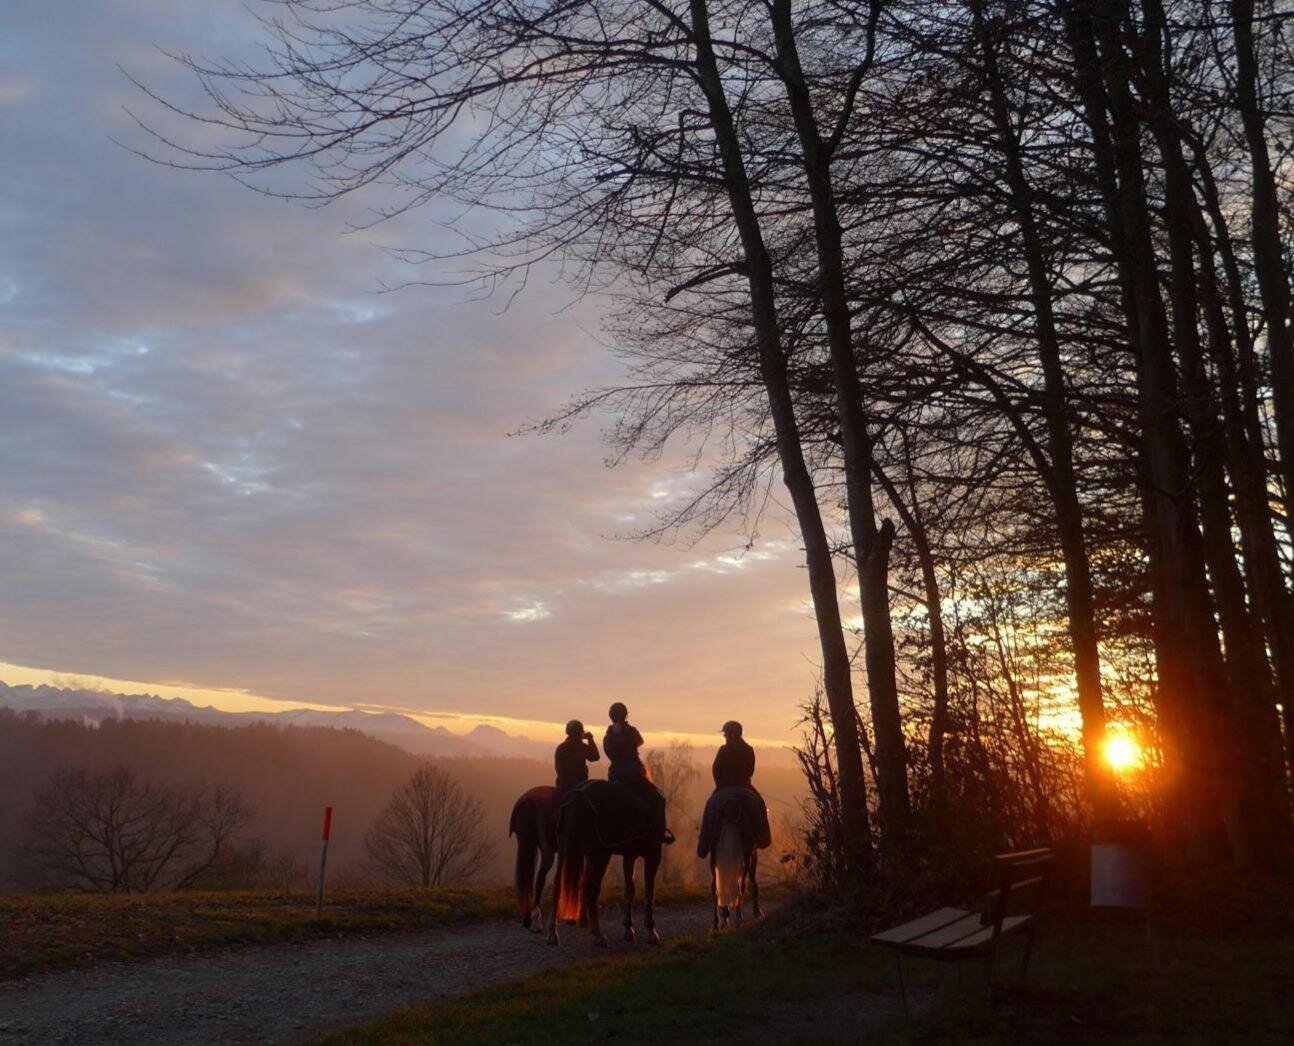 an image or two from my Pixelfed, shows a sunset with three horse riders near a forest